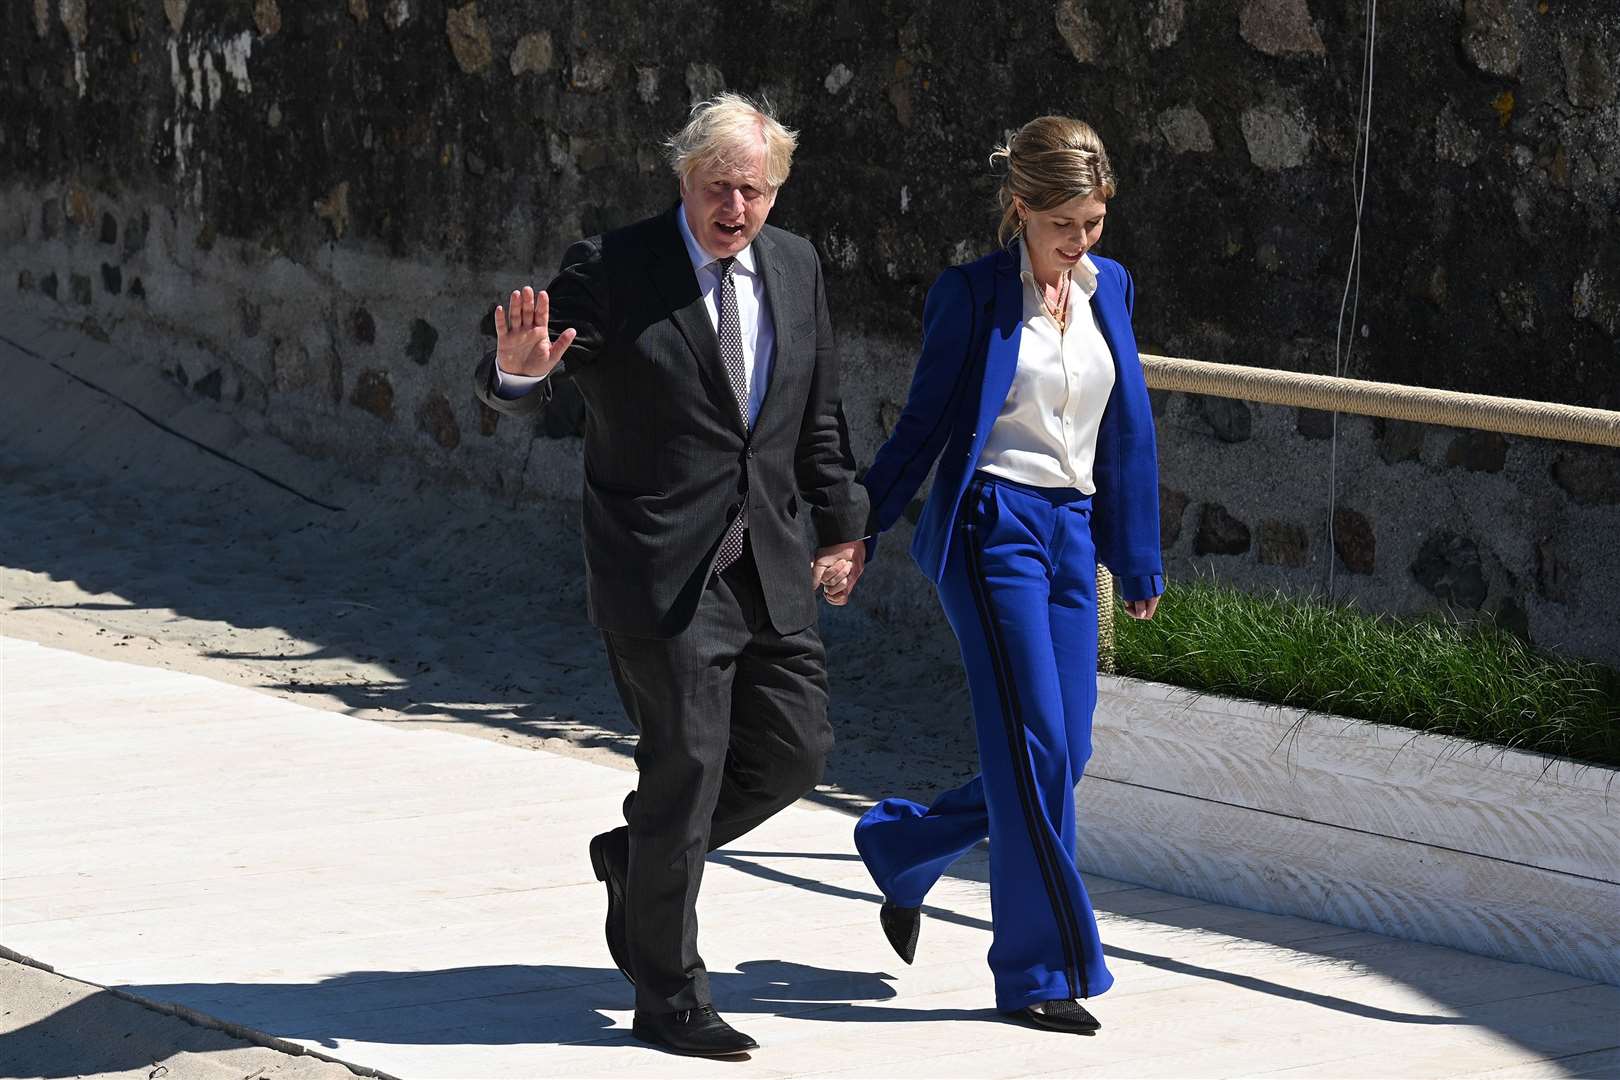 Prime Minister Boris Johnson and his wife Carrie Johnson are pictured together at the G7 summit earlier this year. (Leon Neal/PA)